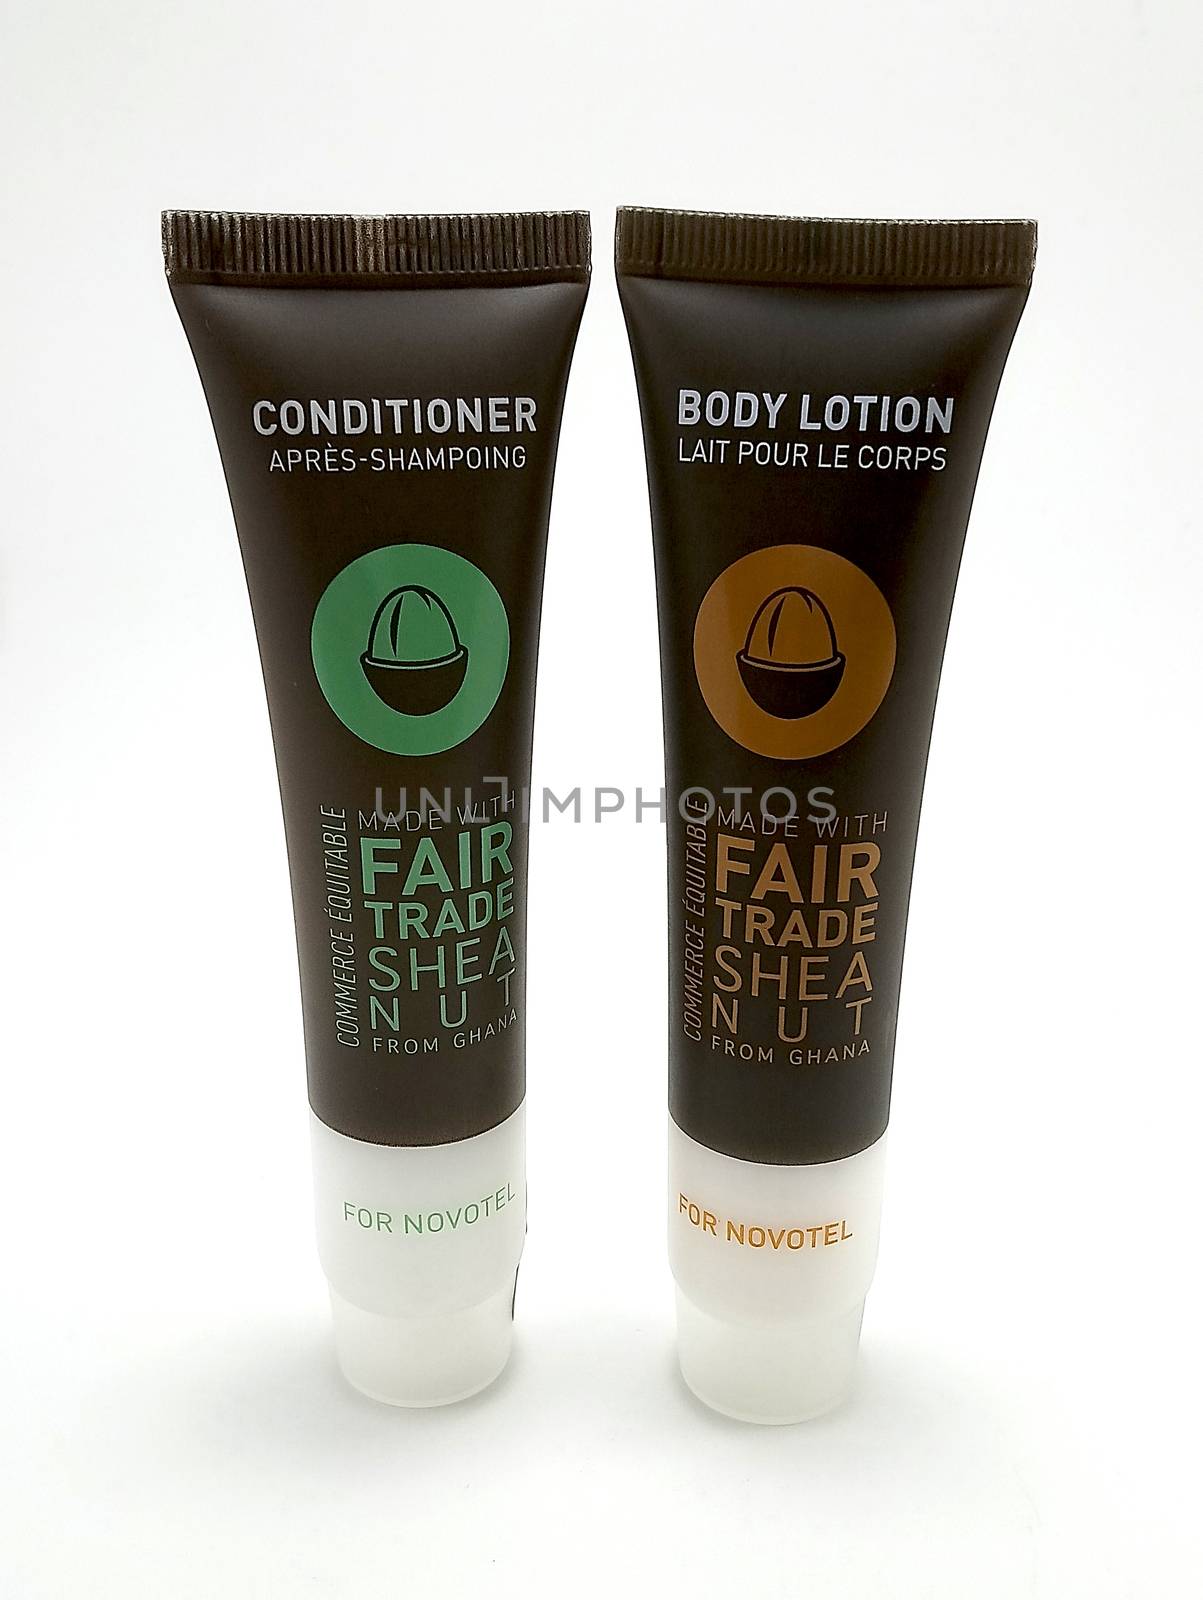 MANILA, PH - JUNE 23 - Novotel body lotion and conditioner tubes on June 23, 2020 in Manila, Philippines.